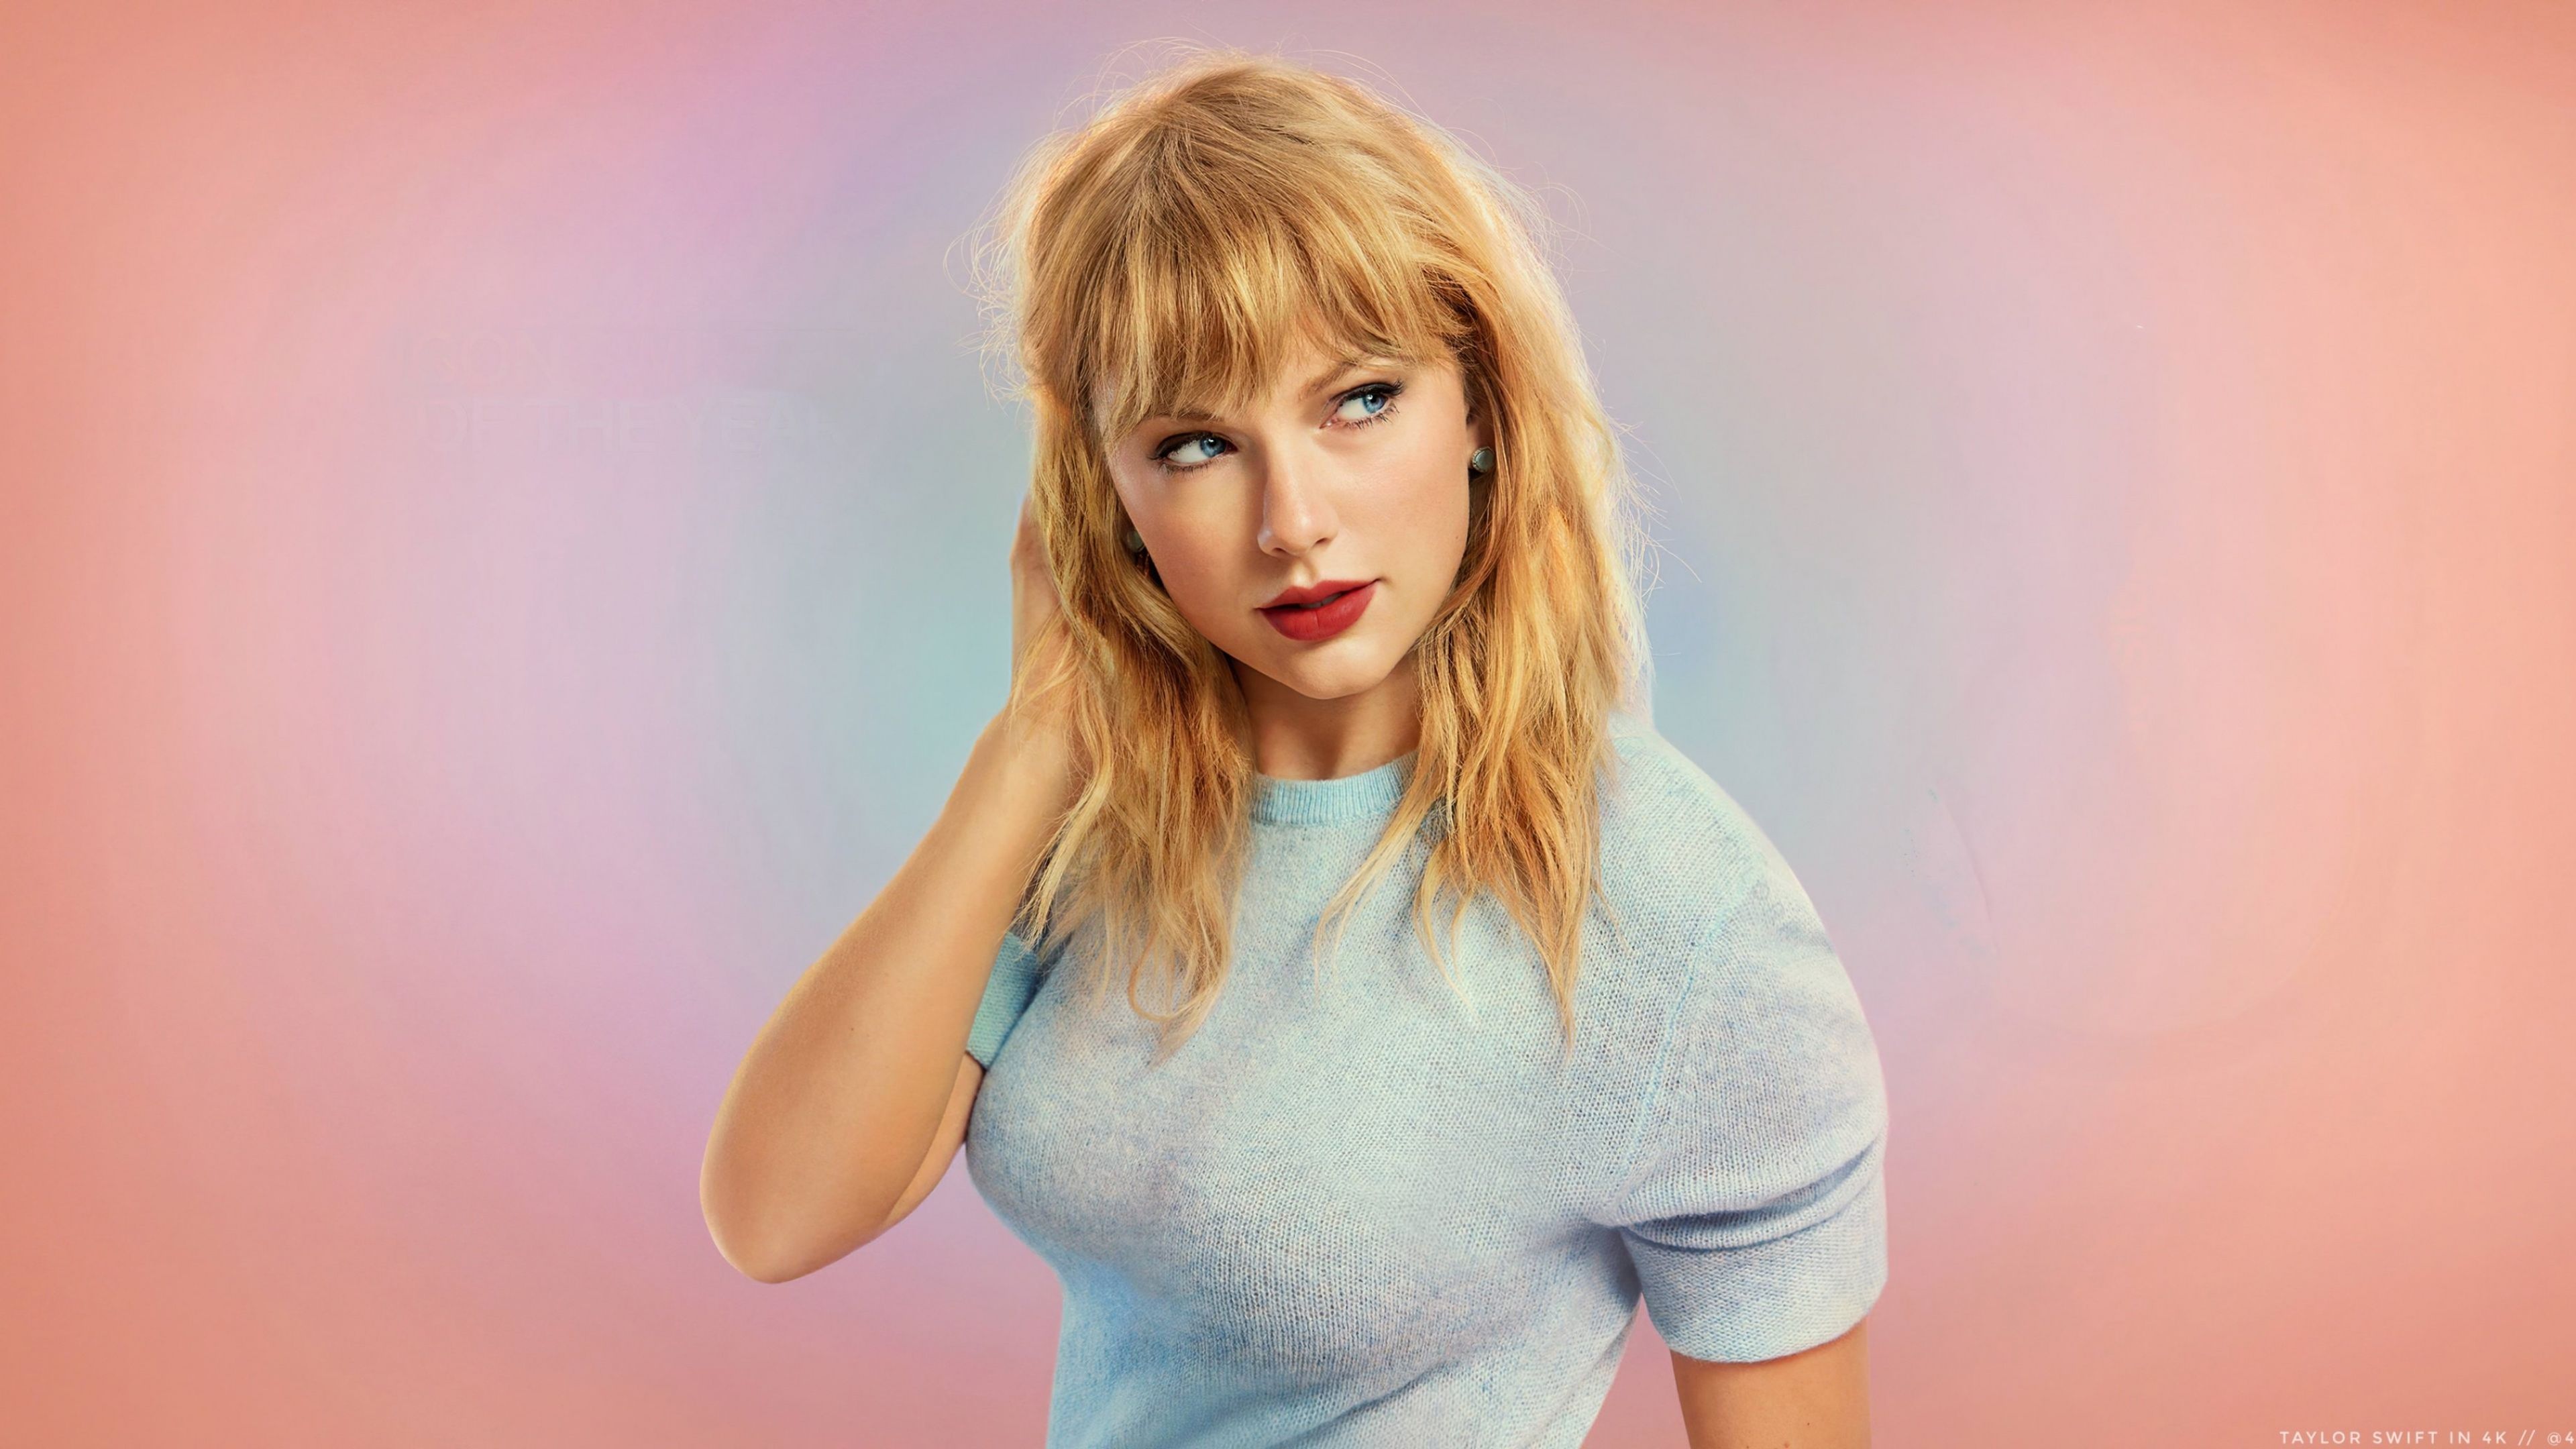 Taylor Swift in a blue top on a pink and blue background - Taylor Swift